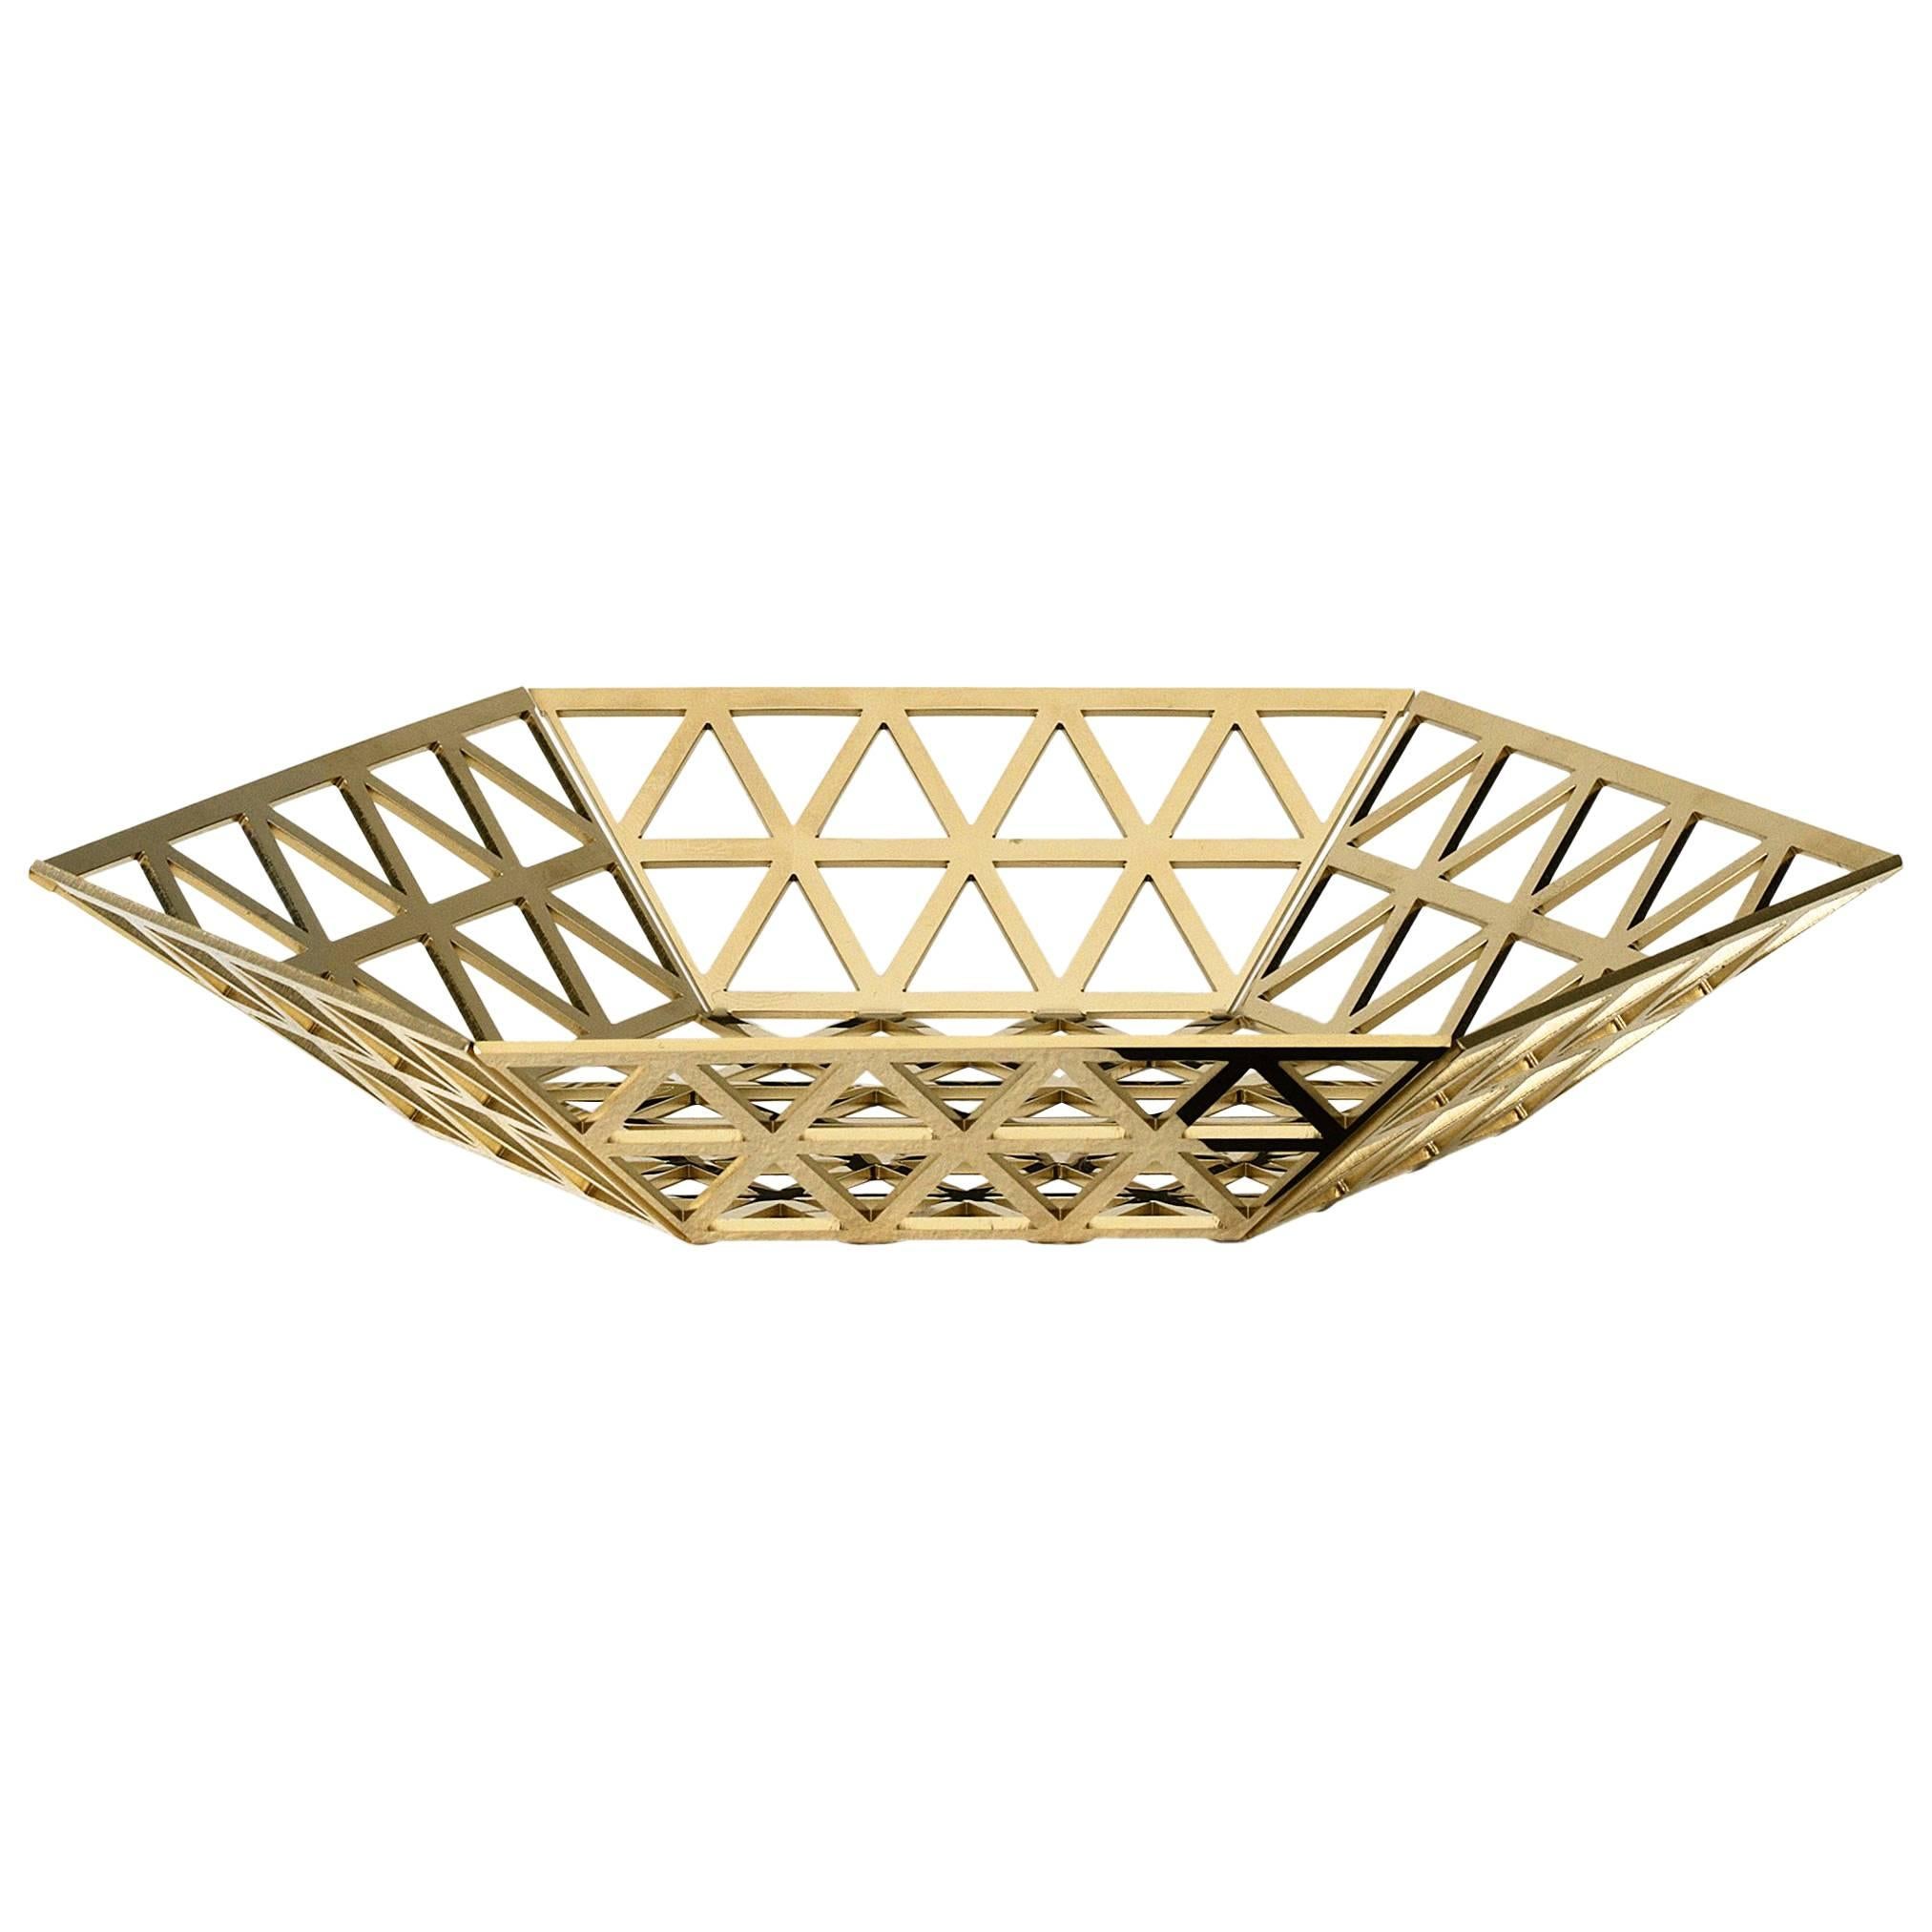 Ghidini 1961 Tip Top Flat Tray in Polished Gold Finish